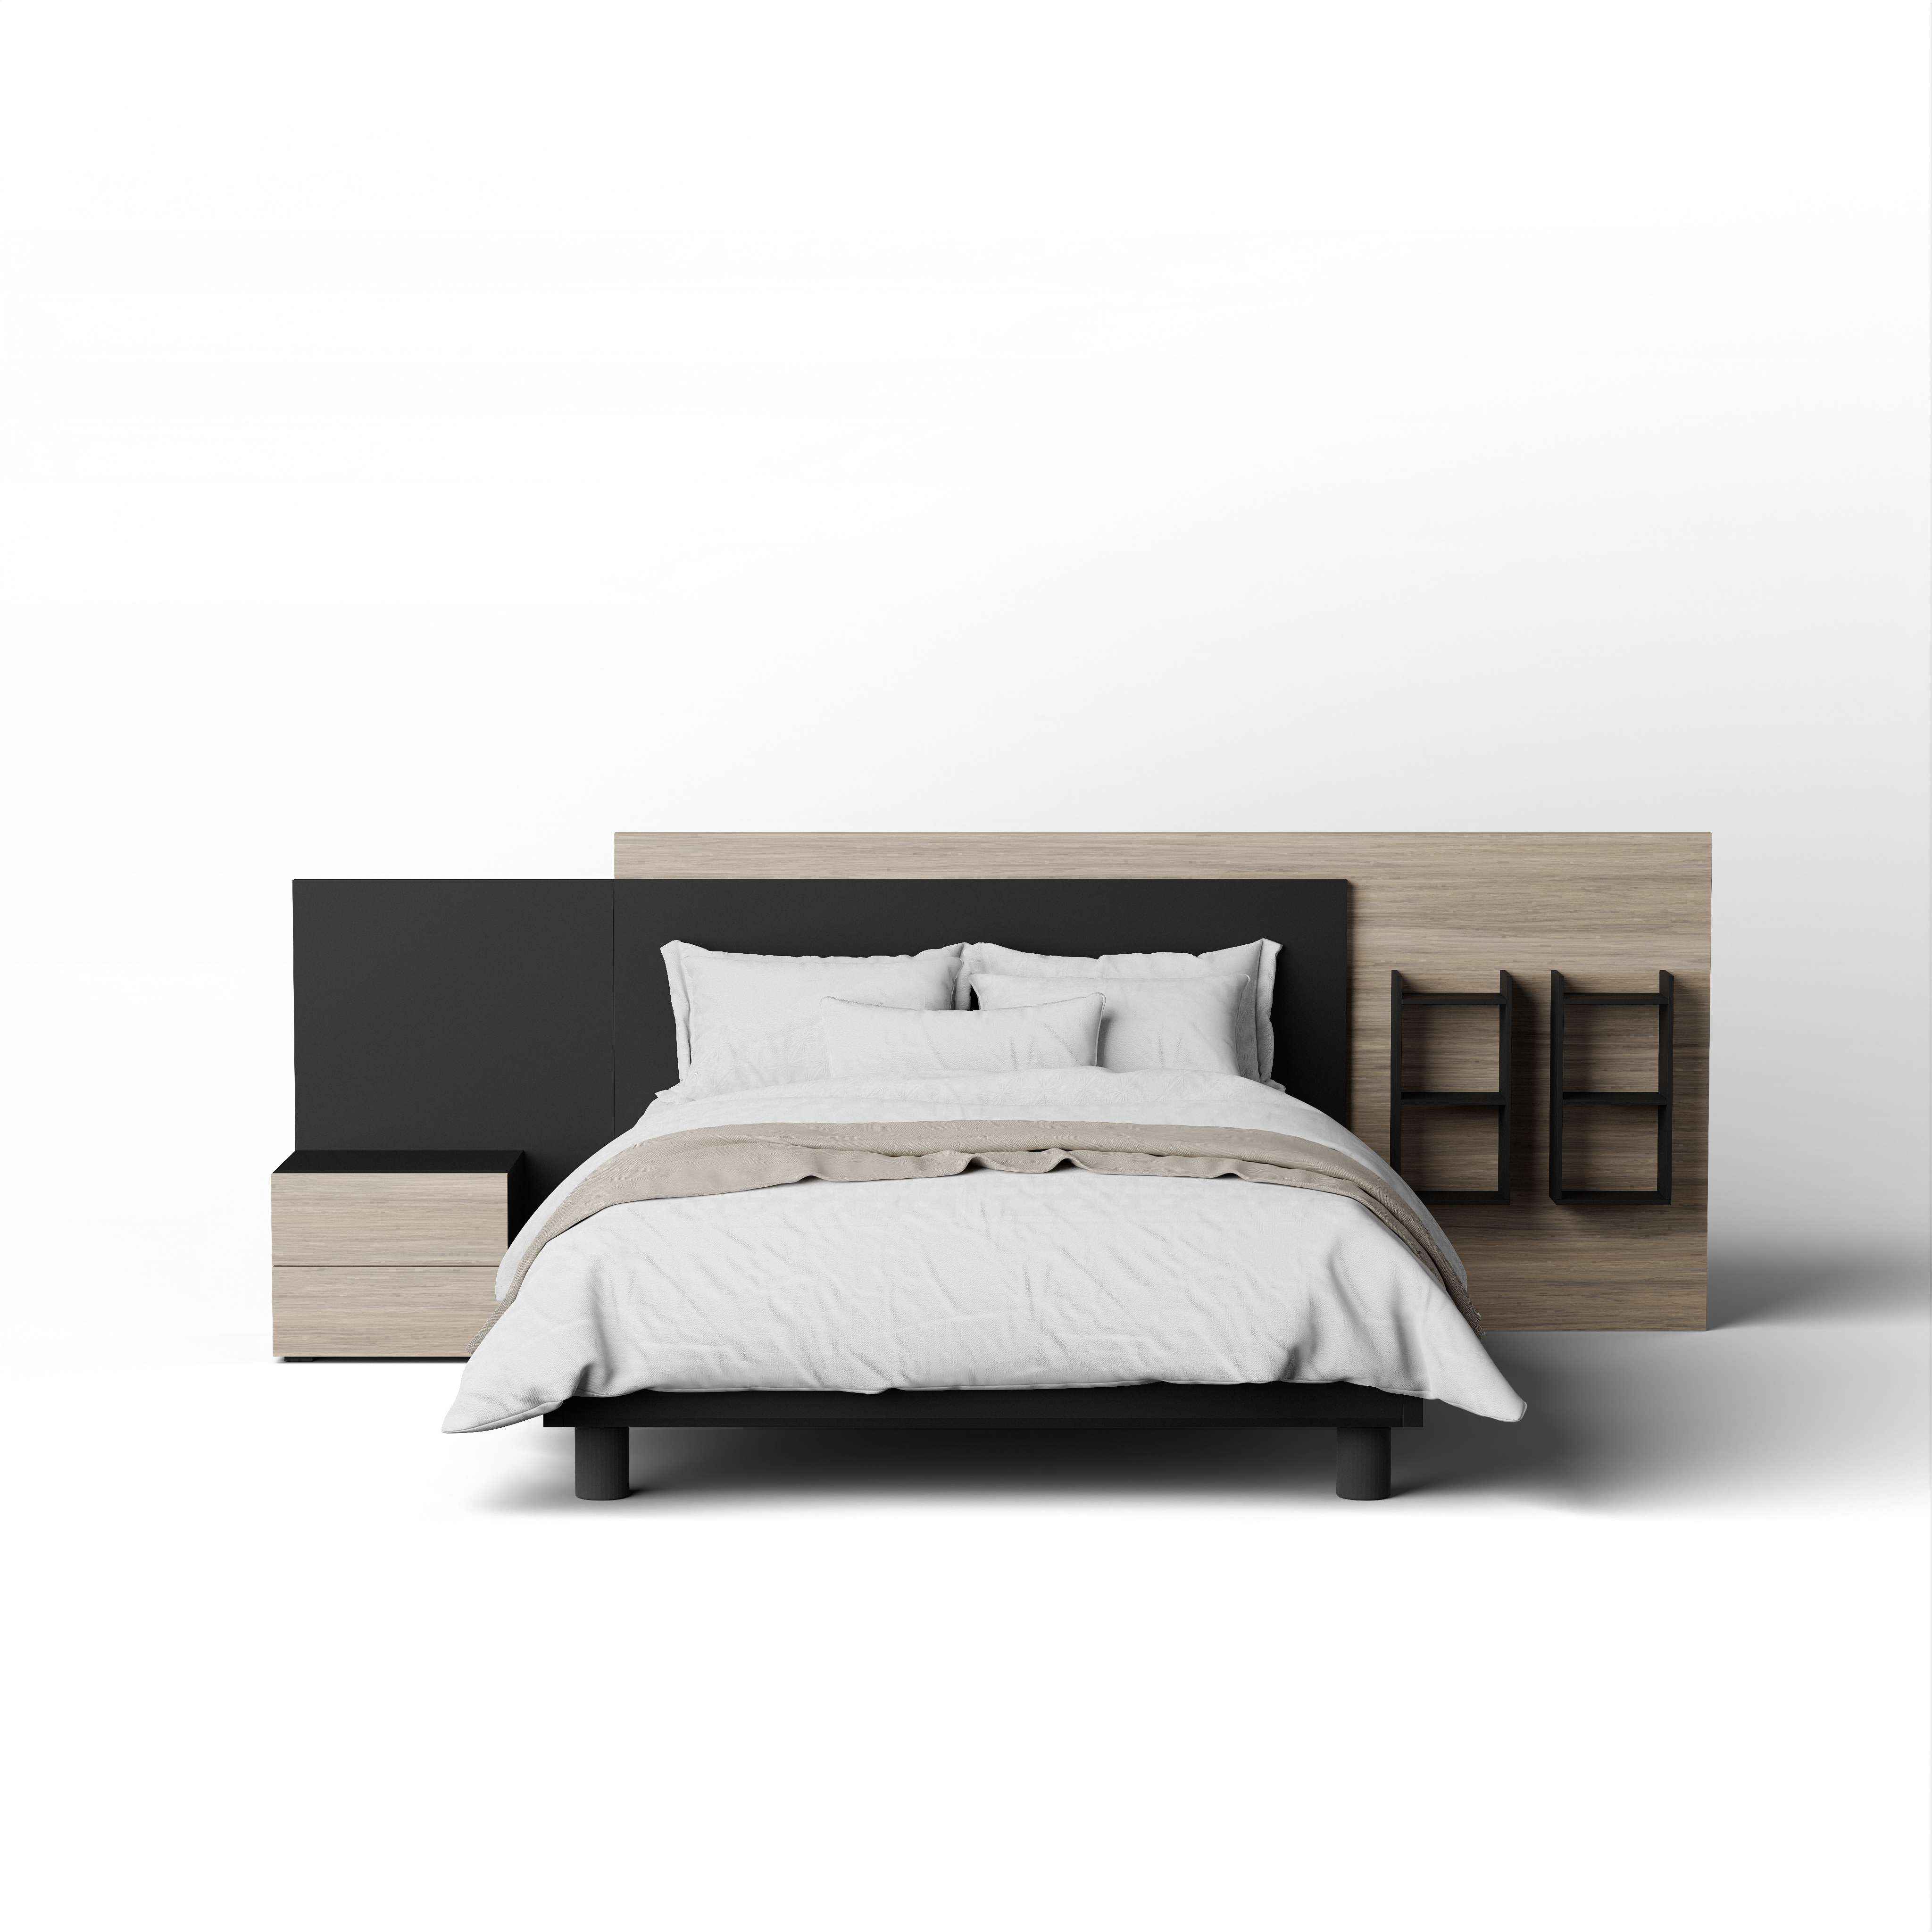 Yumiko Nicole Queen Size Bed